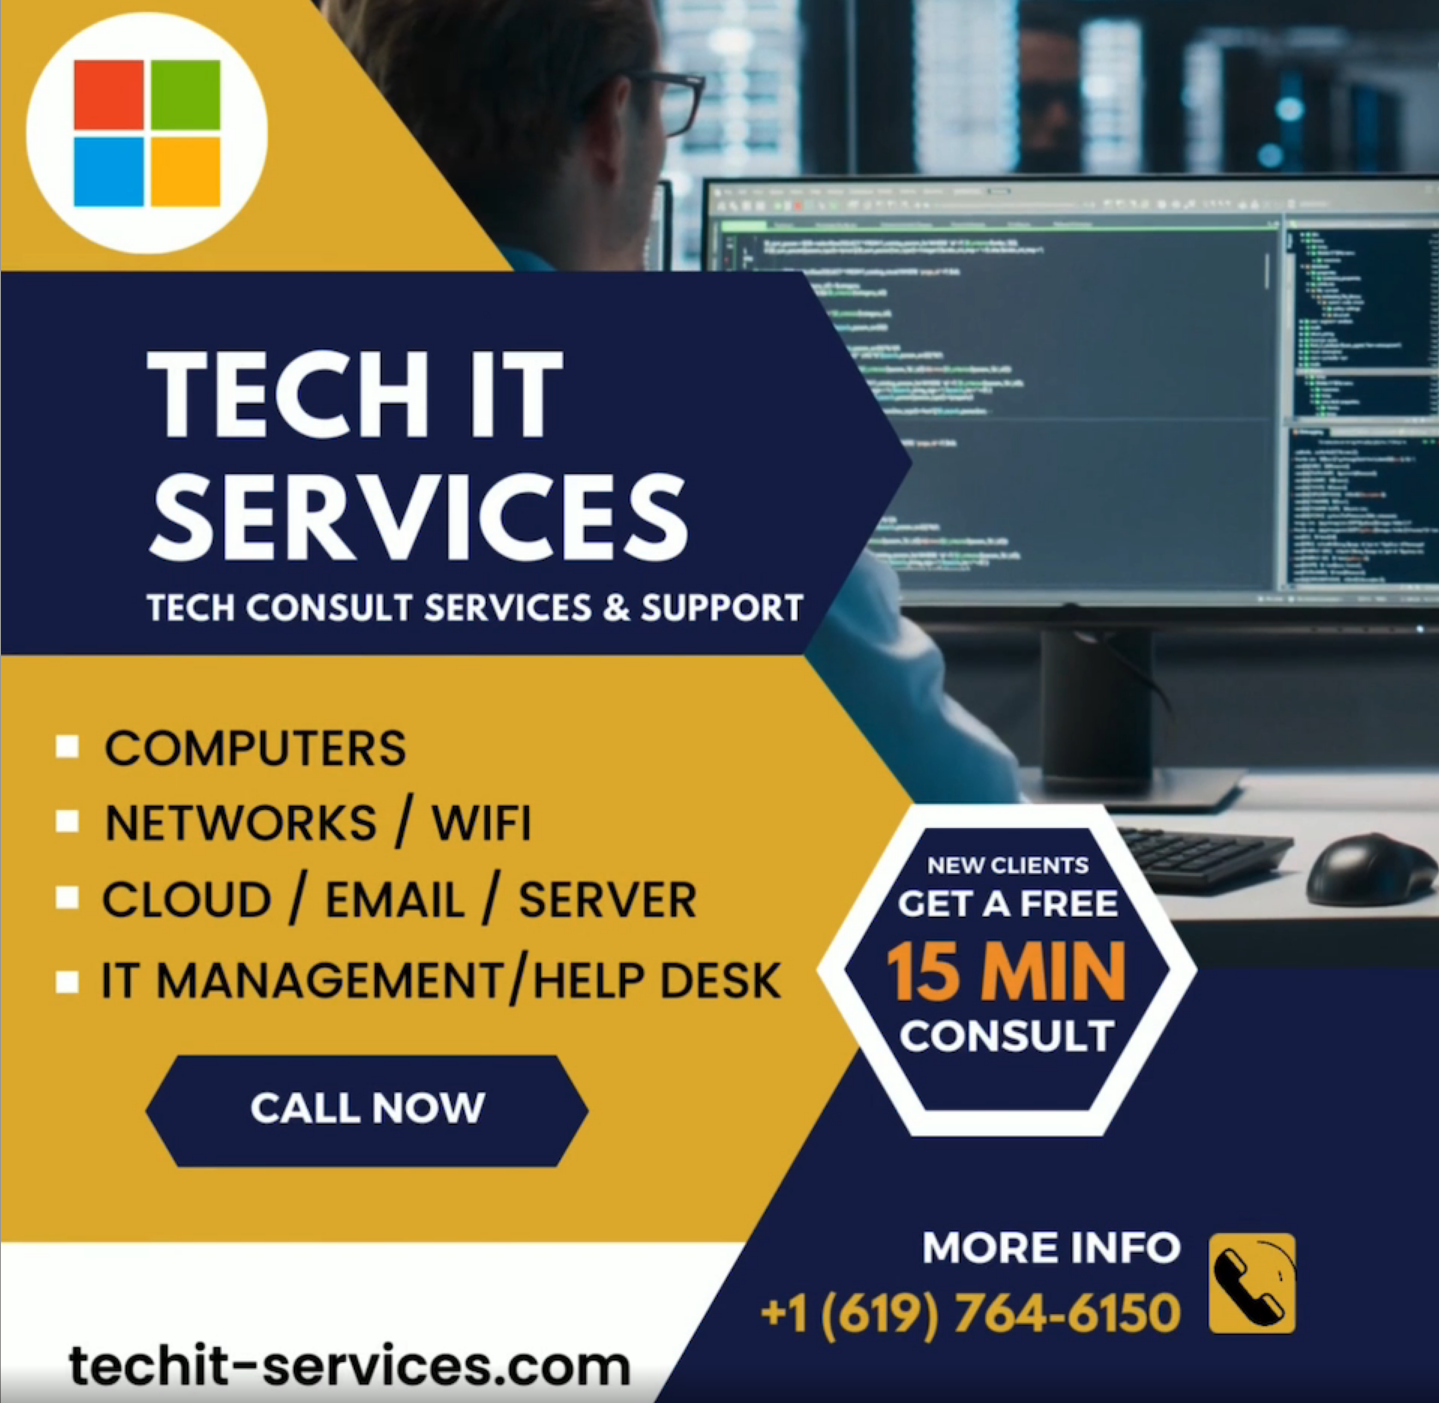 TECH IT SERVICES Tech Consult Services & Support